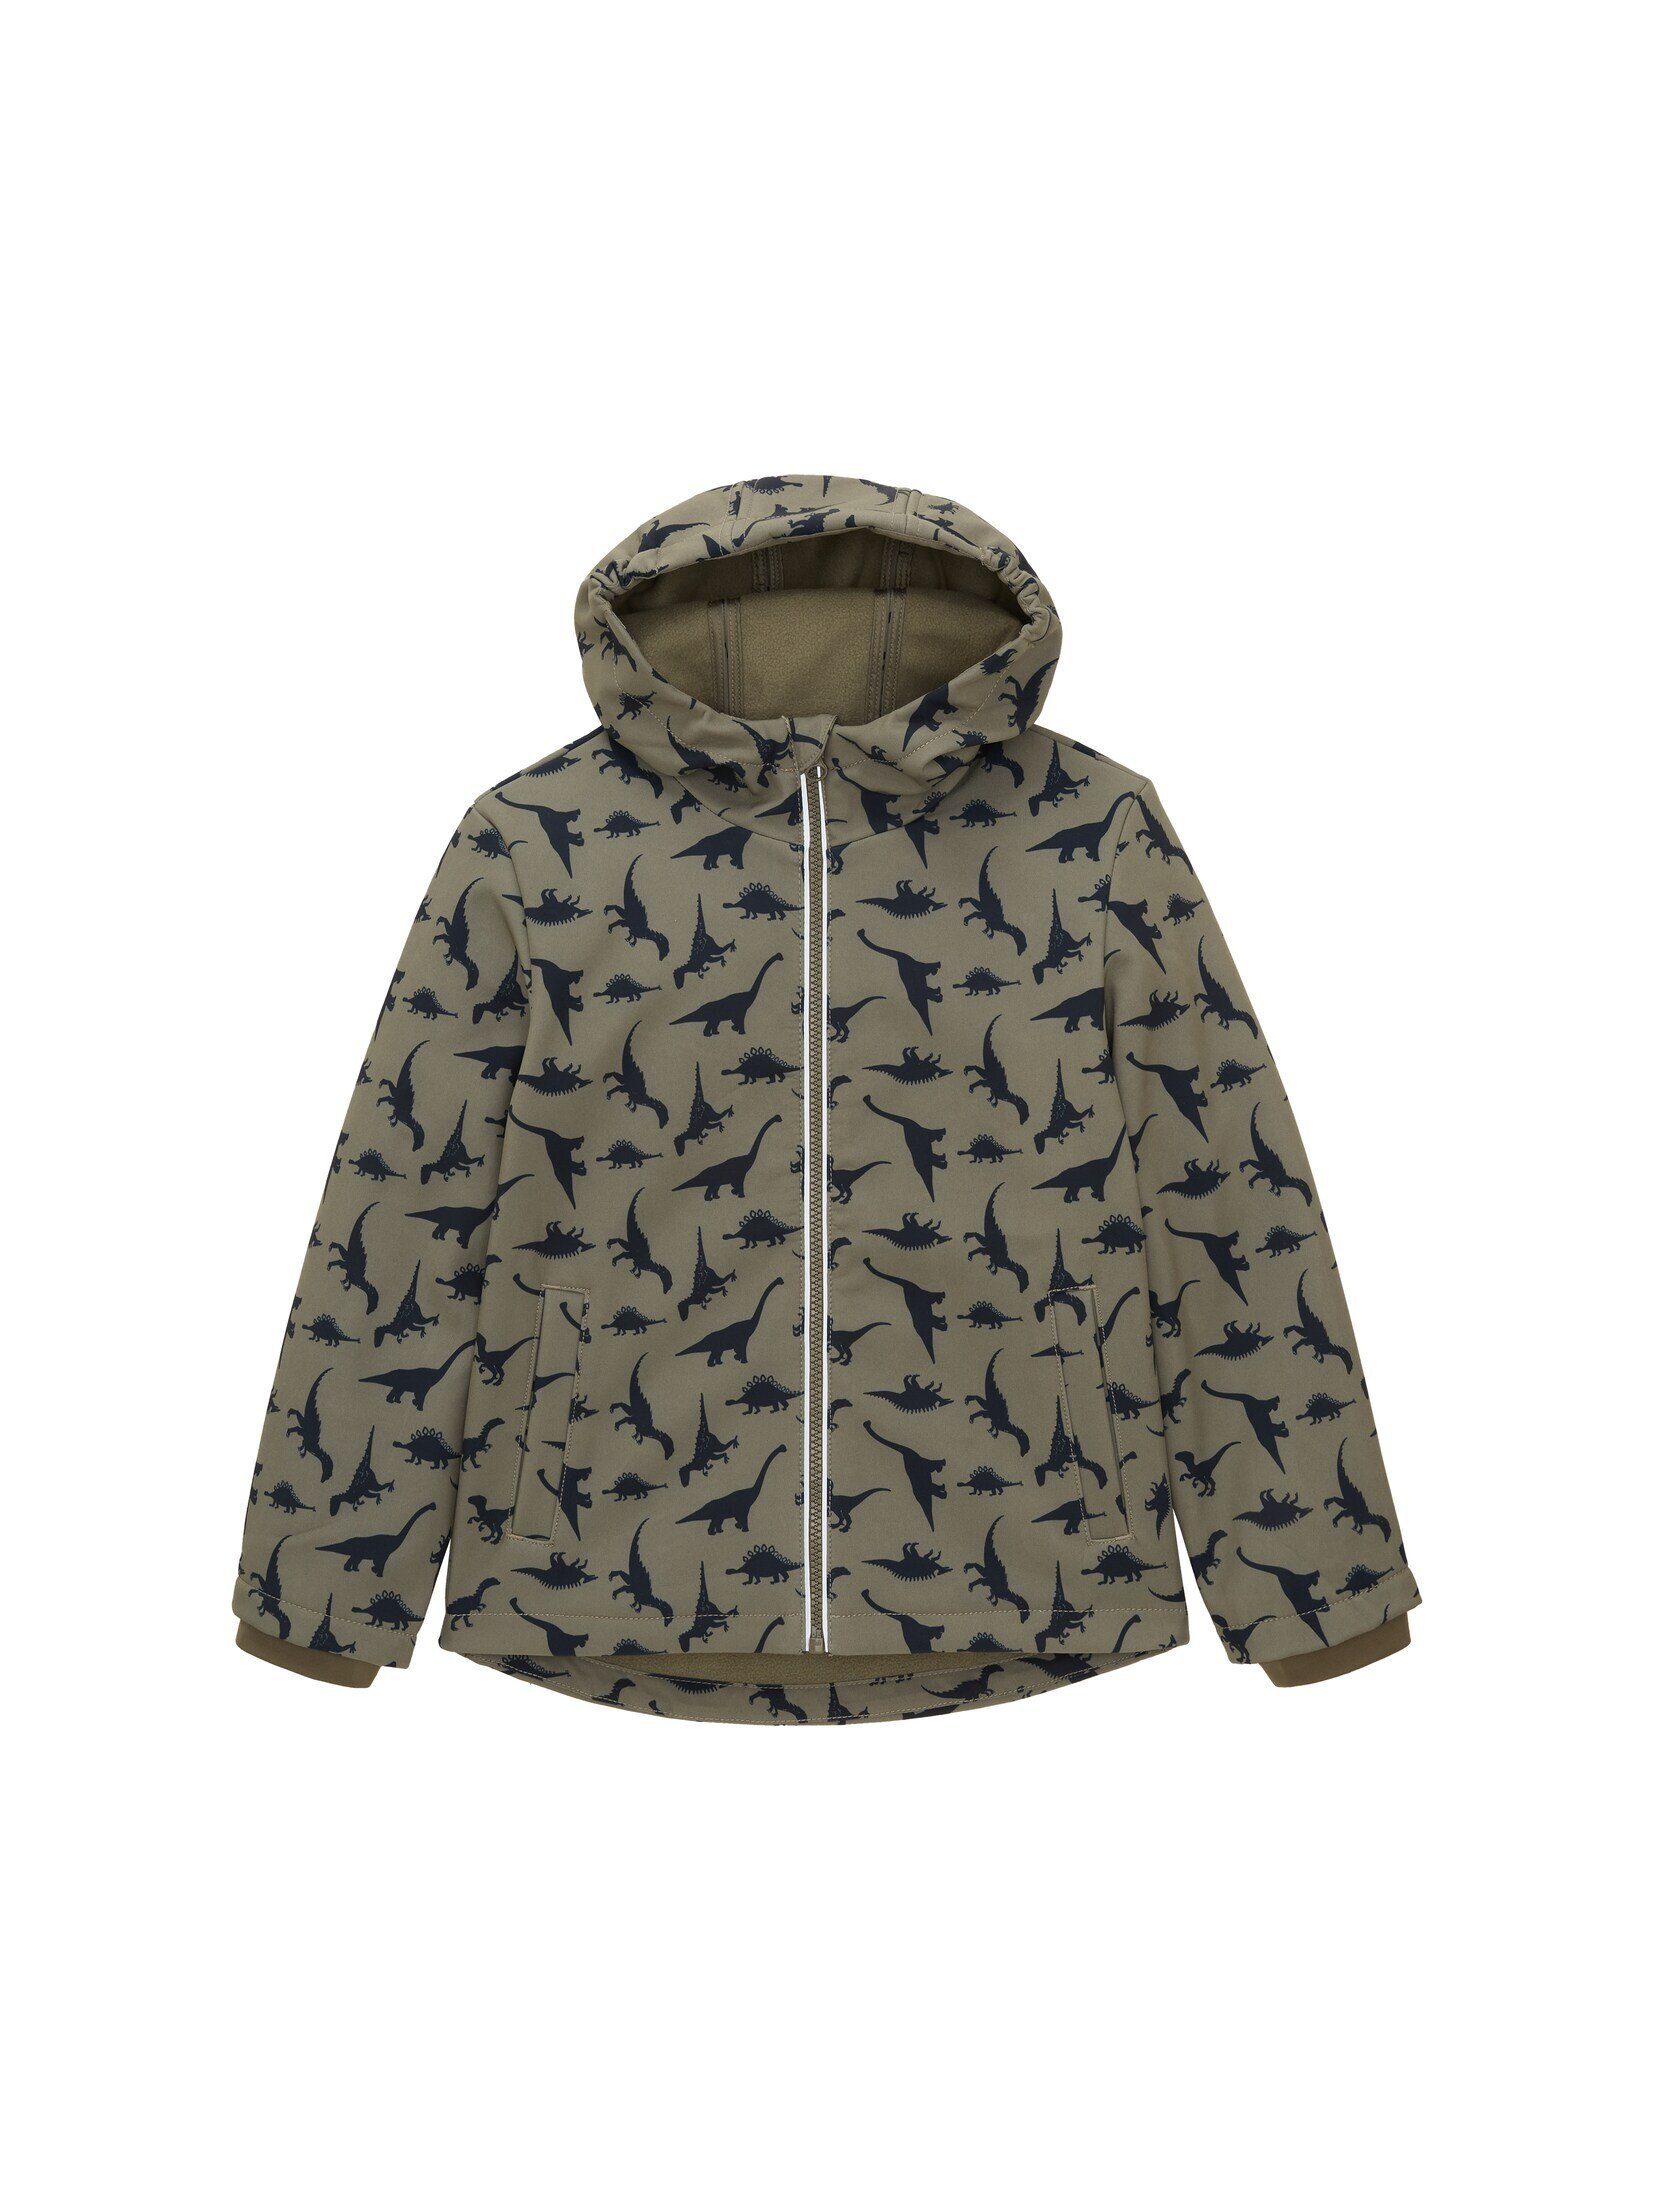 TAILOR print TOM Softshell all over Jacke Collegejacke Allover-Print dino olive mit